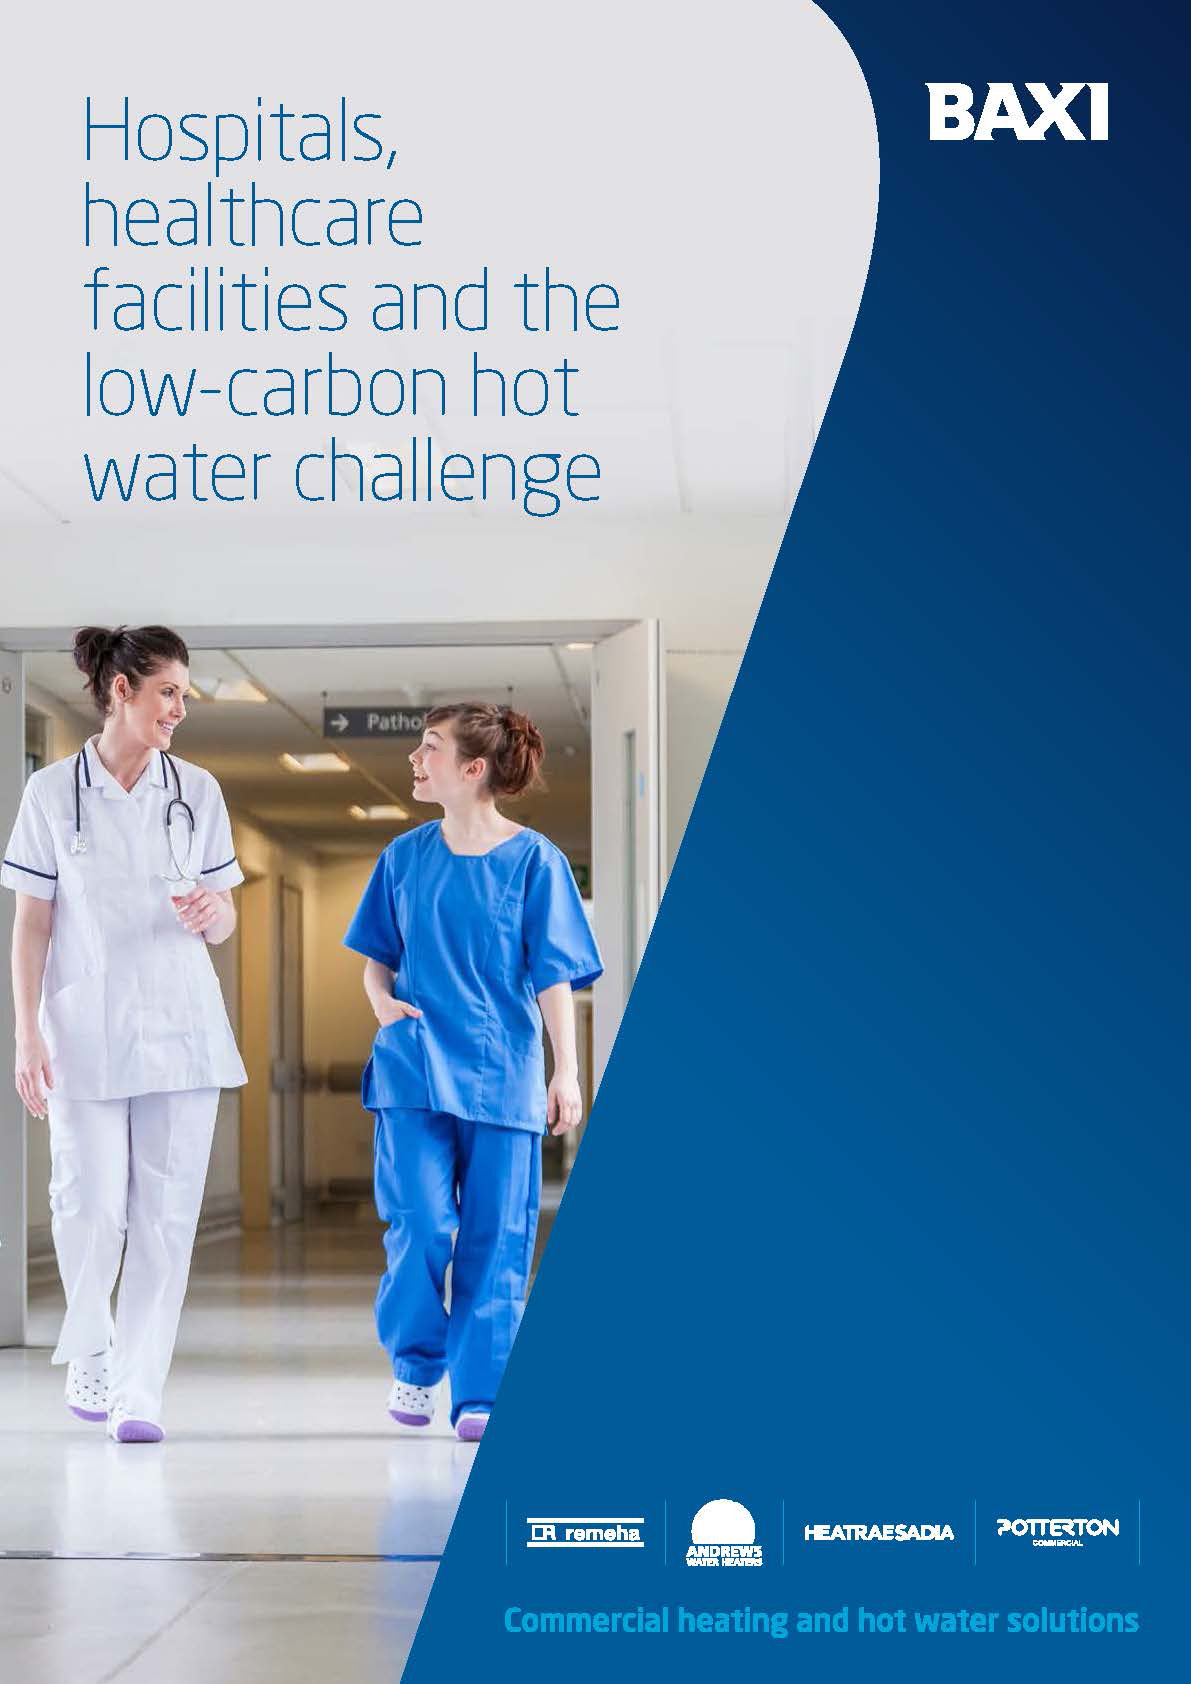 New Baxi guide sets out achievable options for safe, more efficient hot water for healthcare